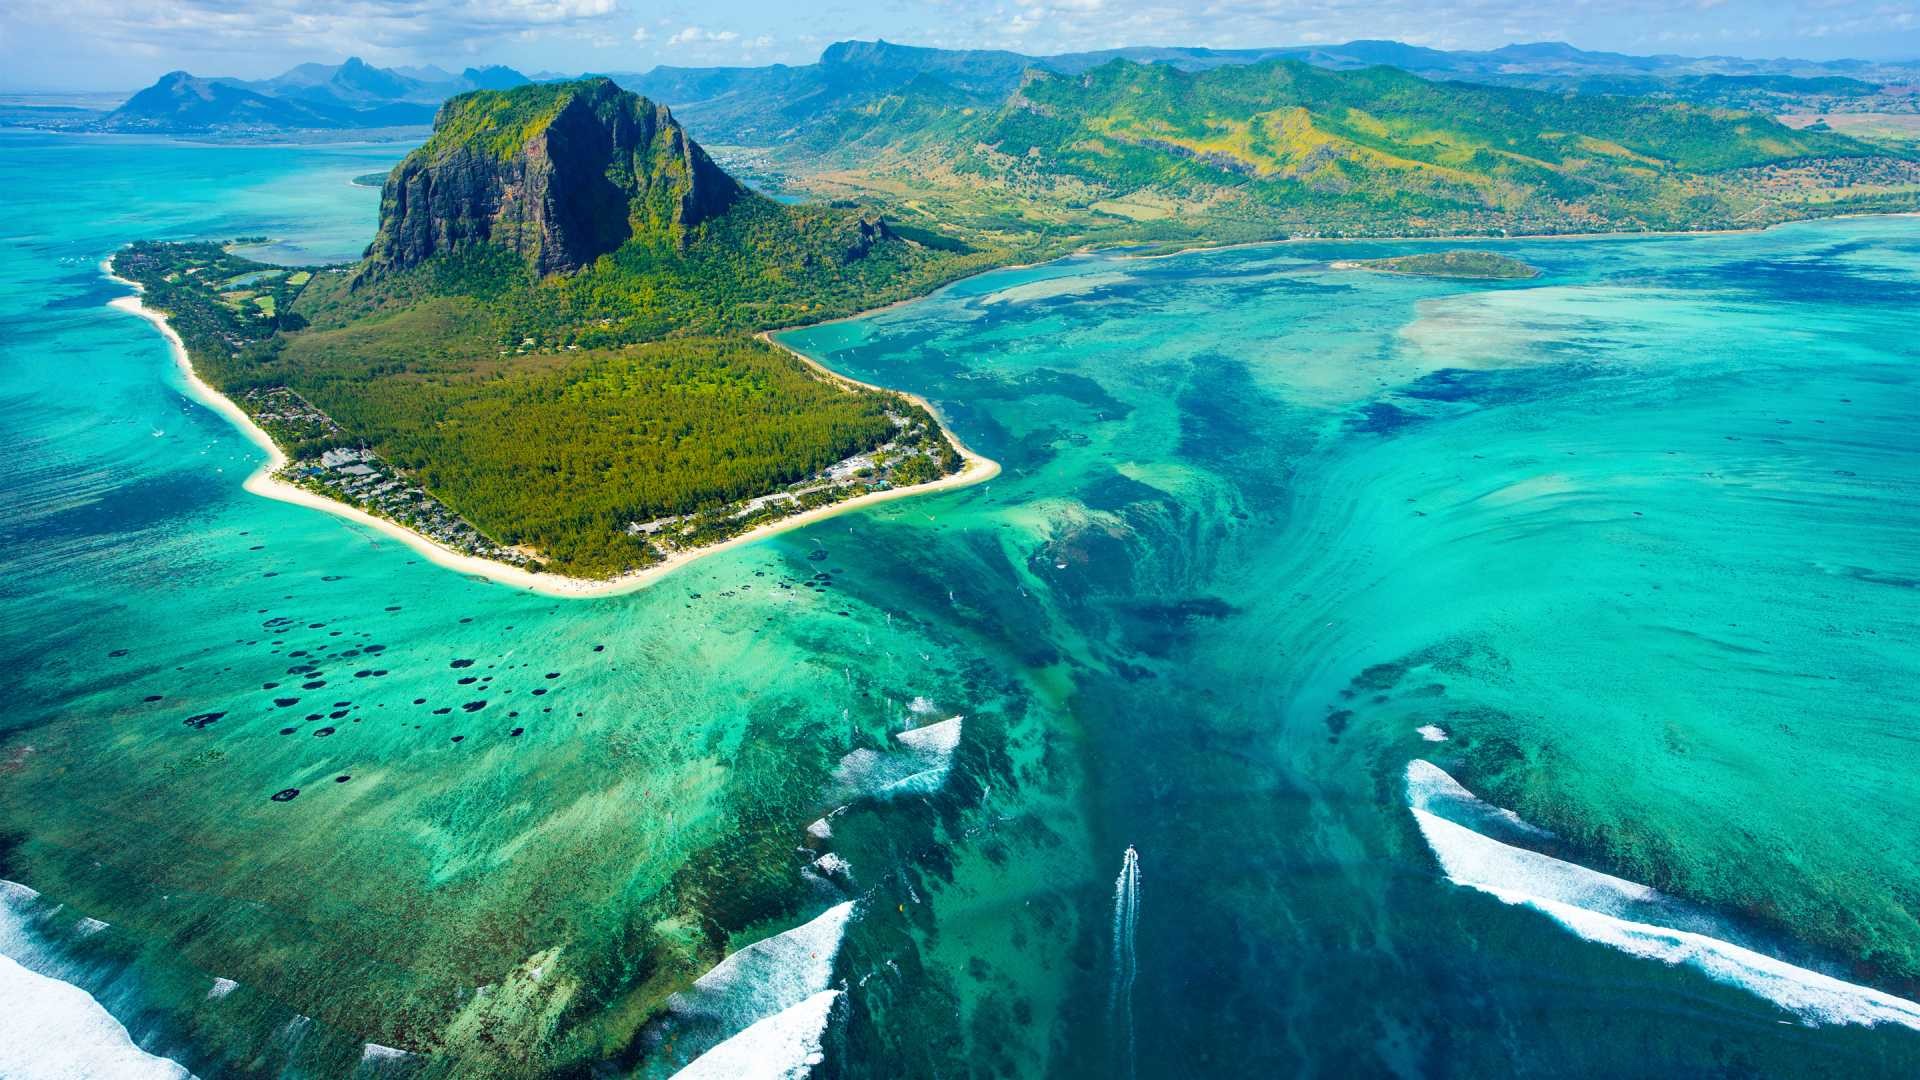 skypark holidays-Mauritius, Next to the paradise | Mauritius Tour package from Nepal